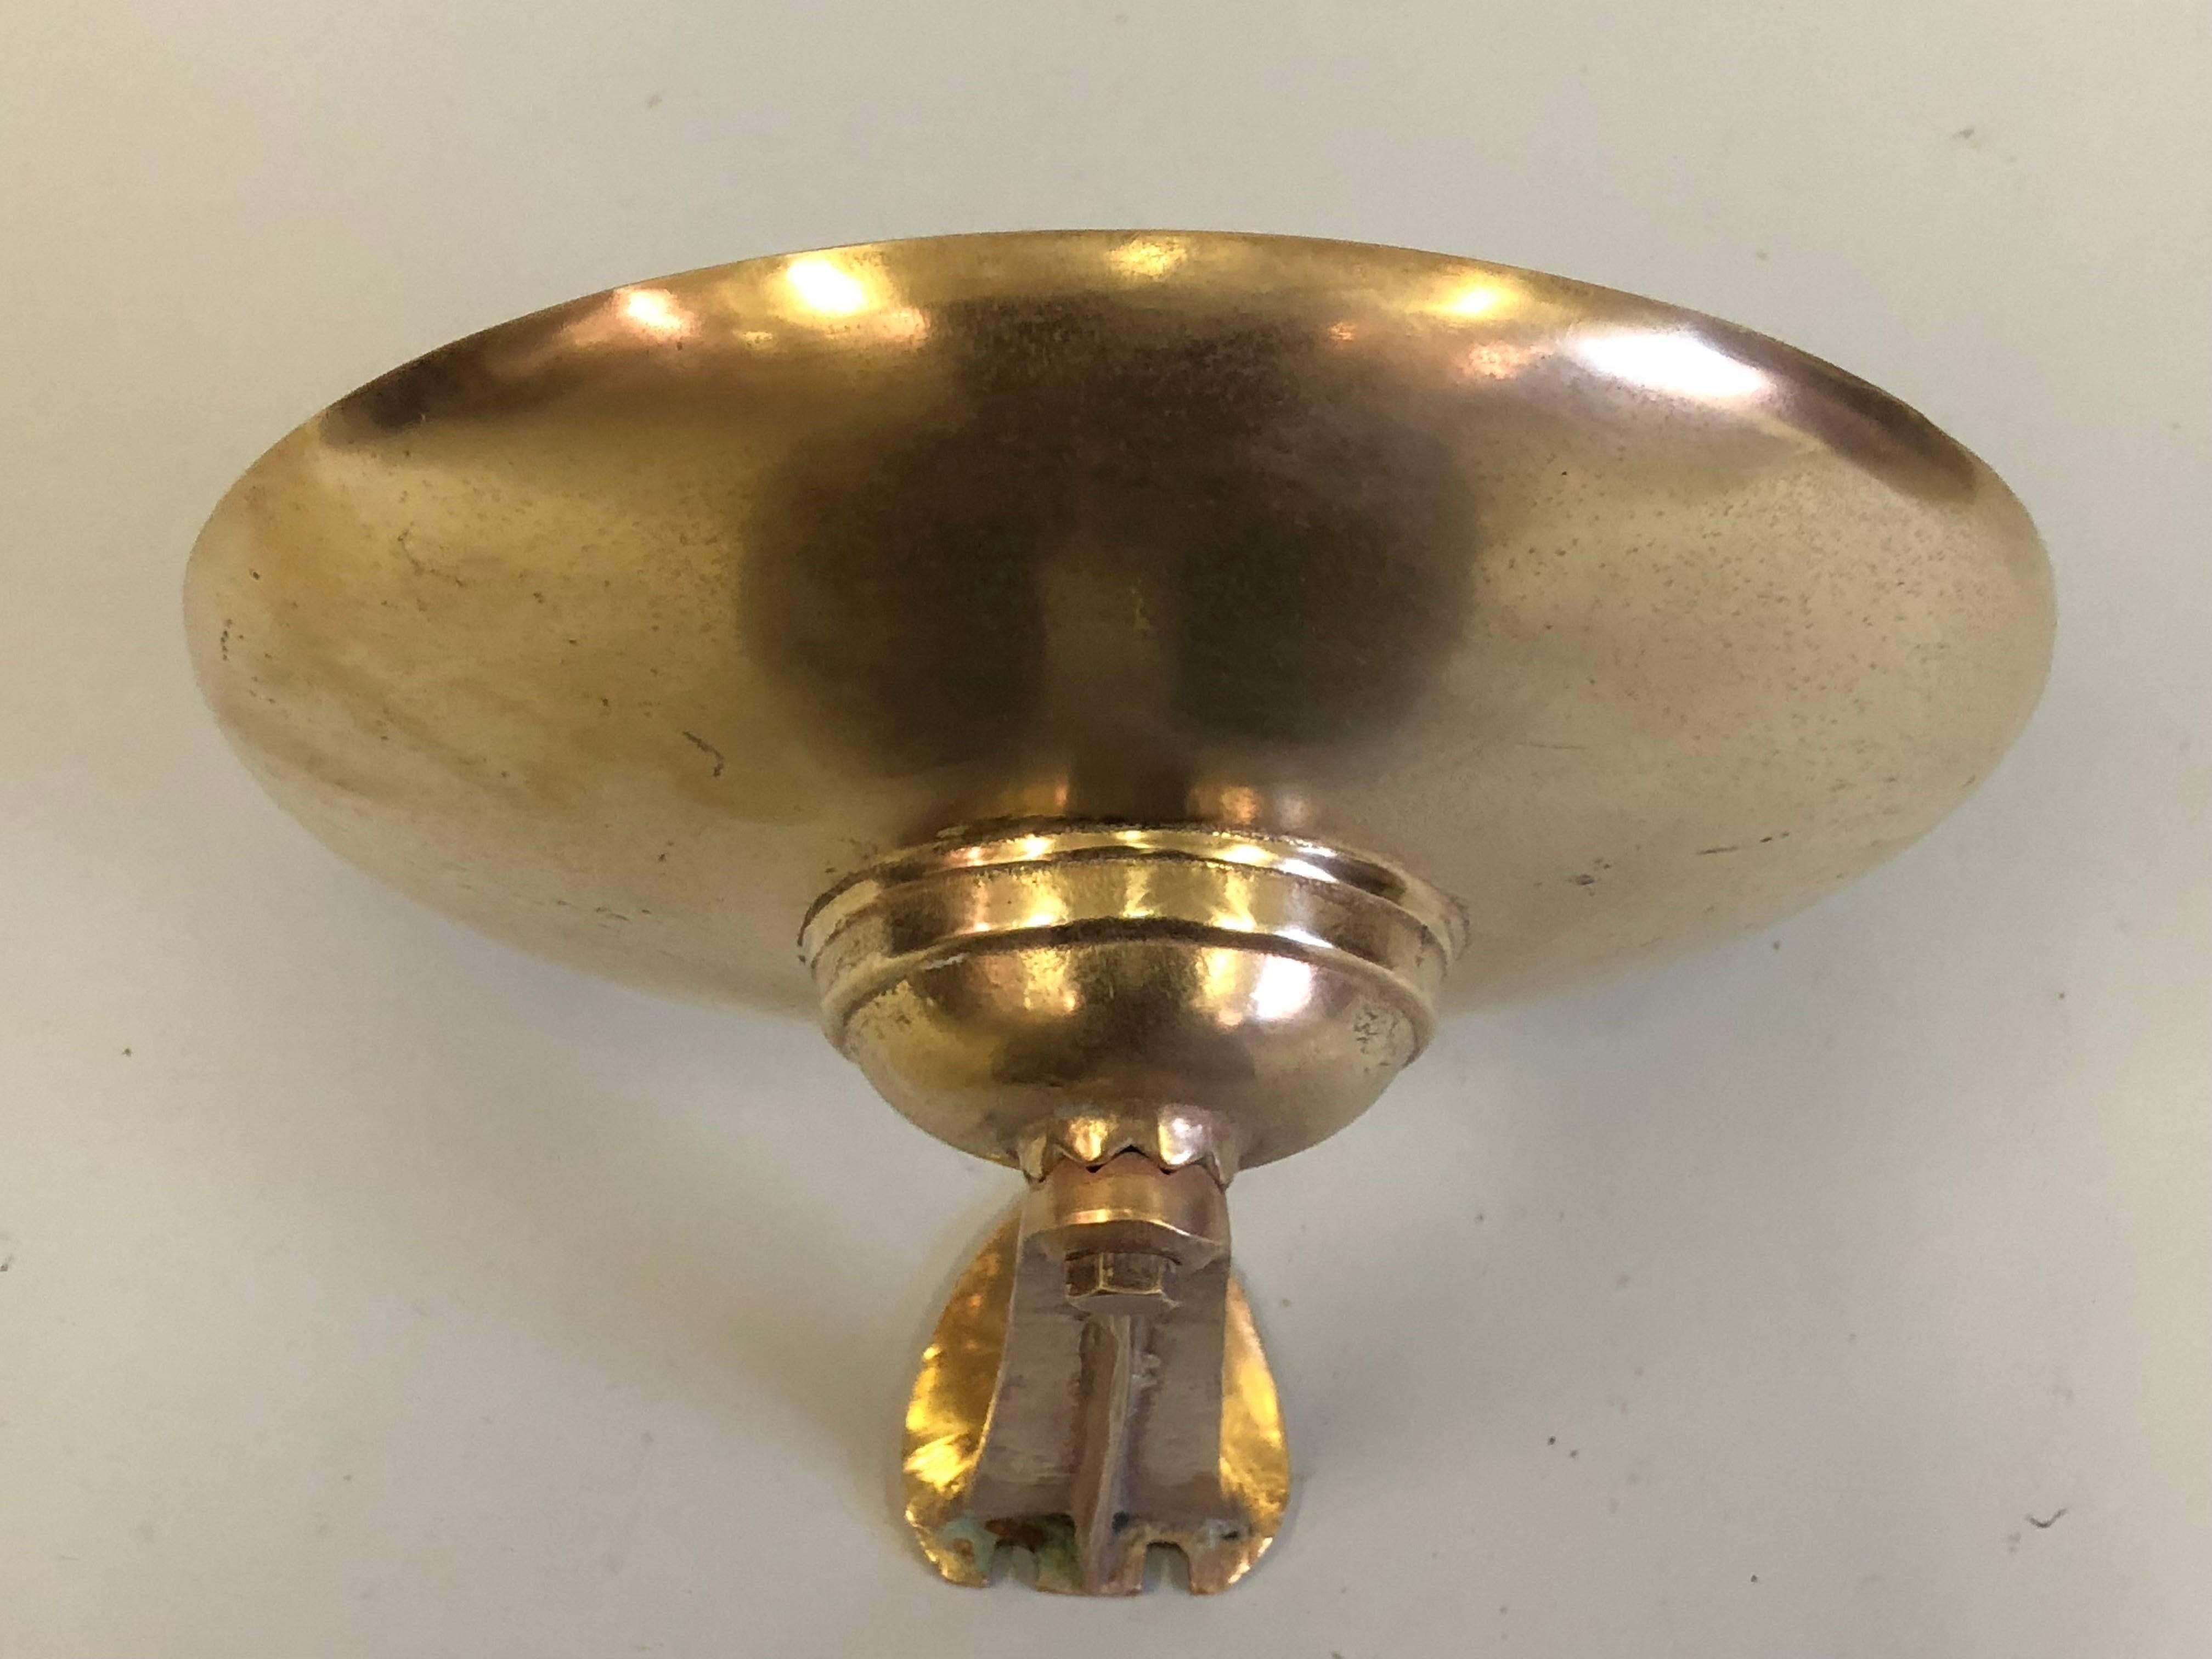 3 Large Elegant Italian Mid-Century Modern Solid Polished Gilt Bronze Wall Sconces. 

Each piece is cantilevered out from the wall and has a tapered stem supporting a round disc. There is refined detailing in all parts including wall mount and